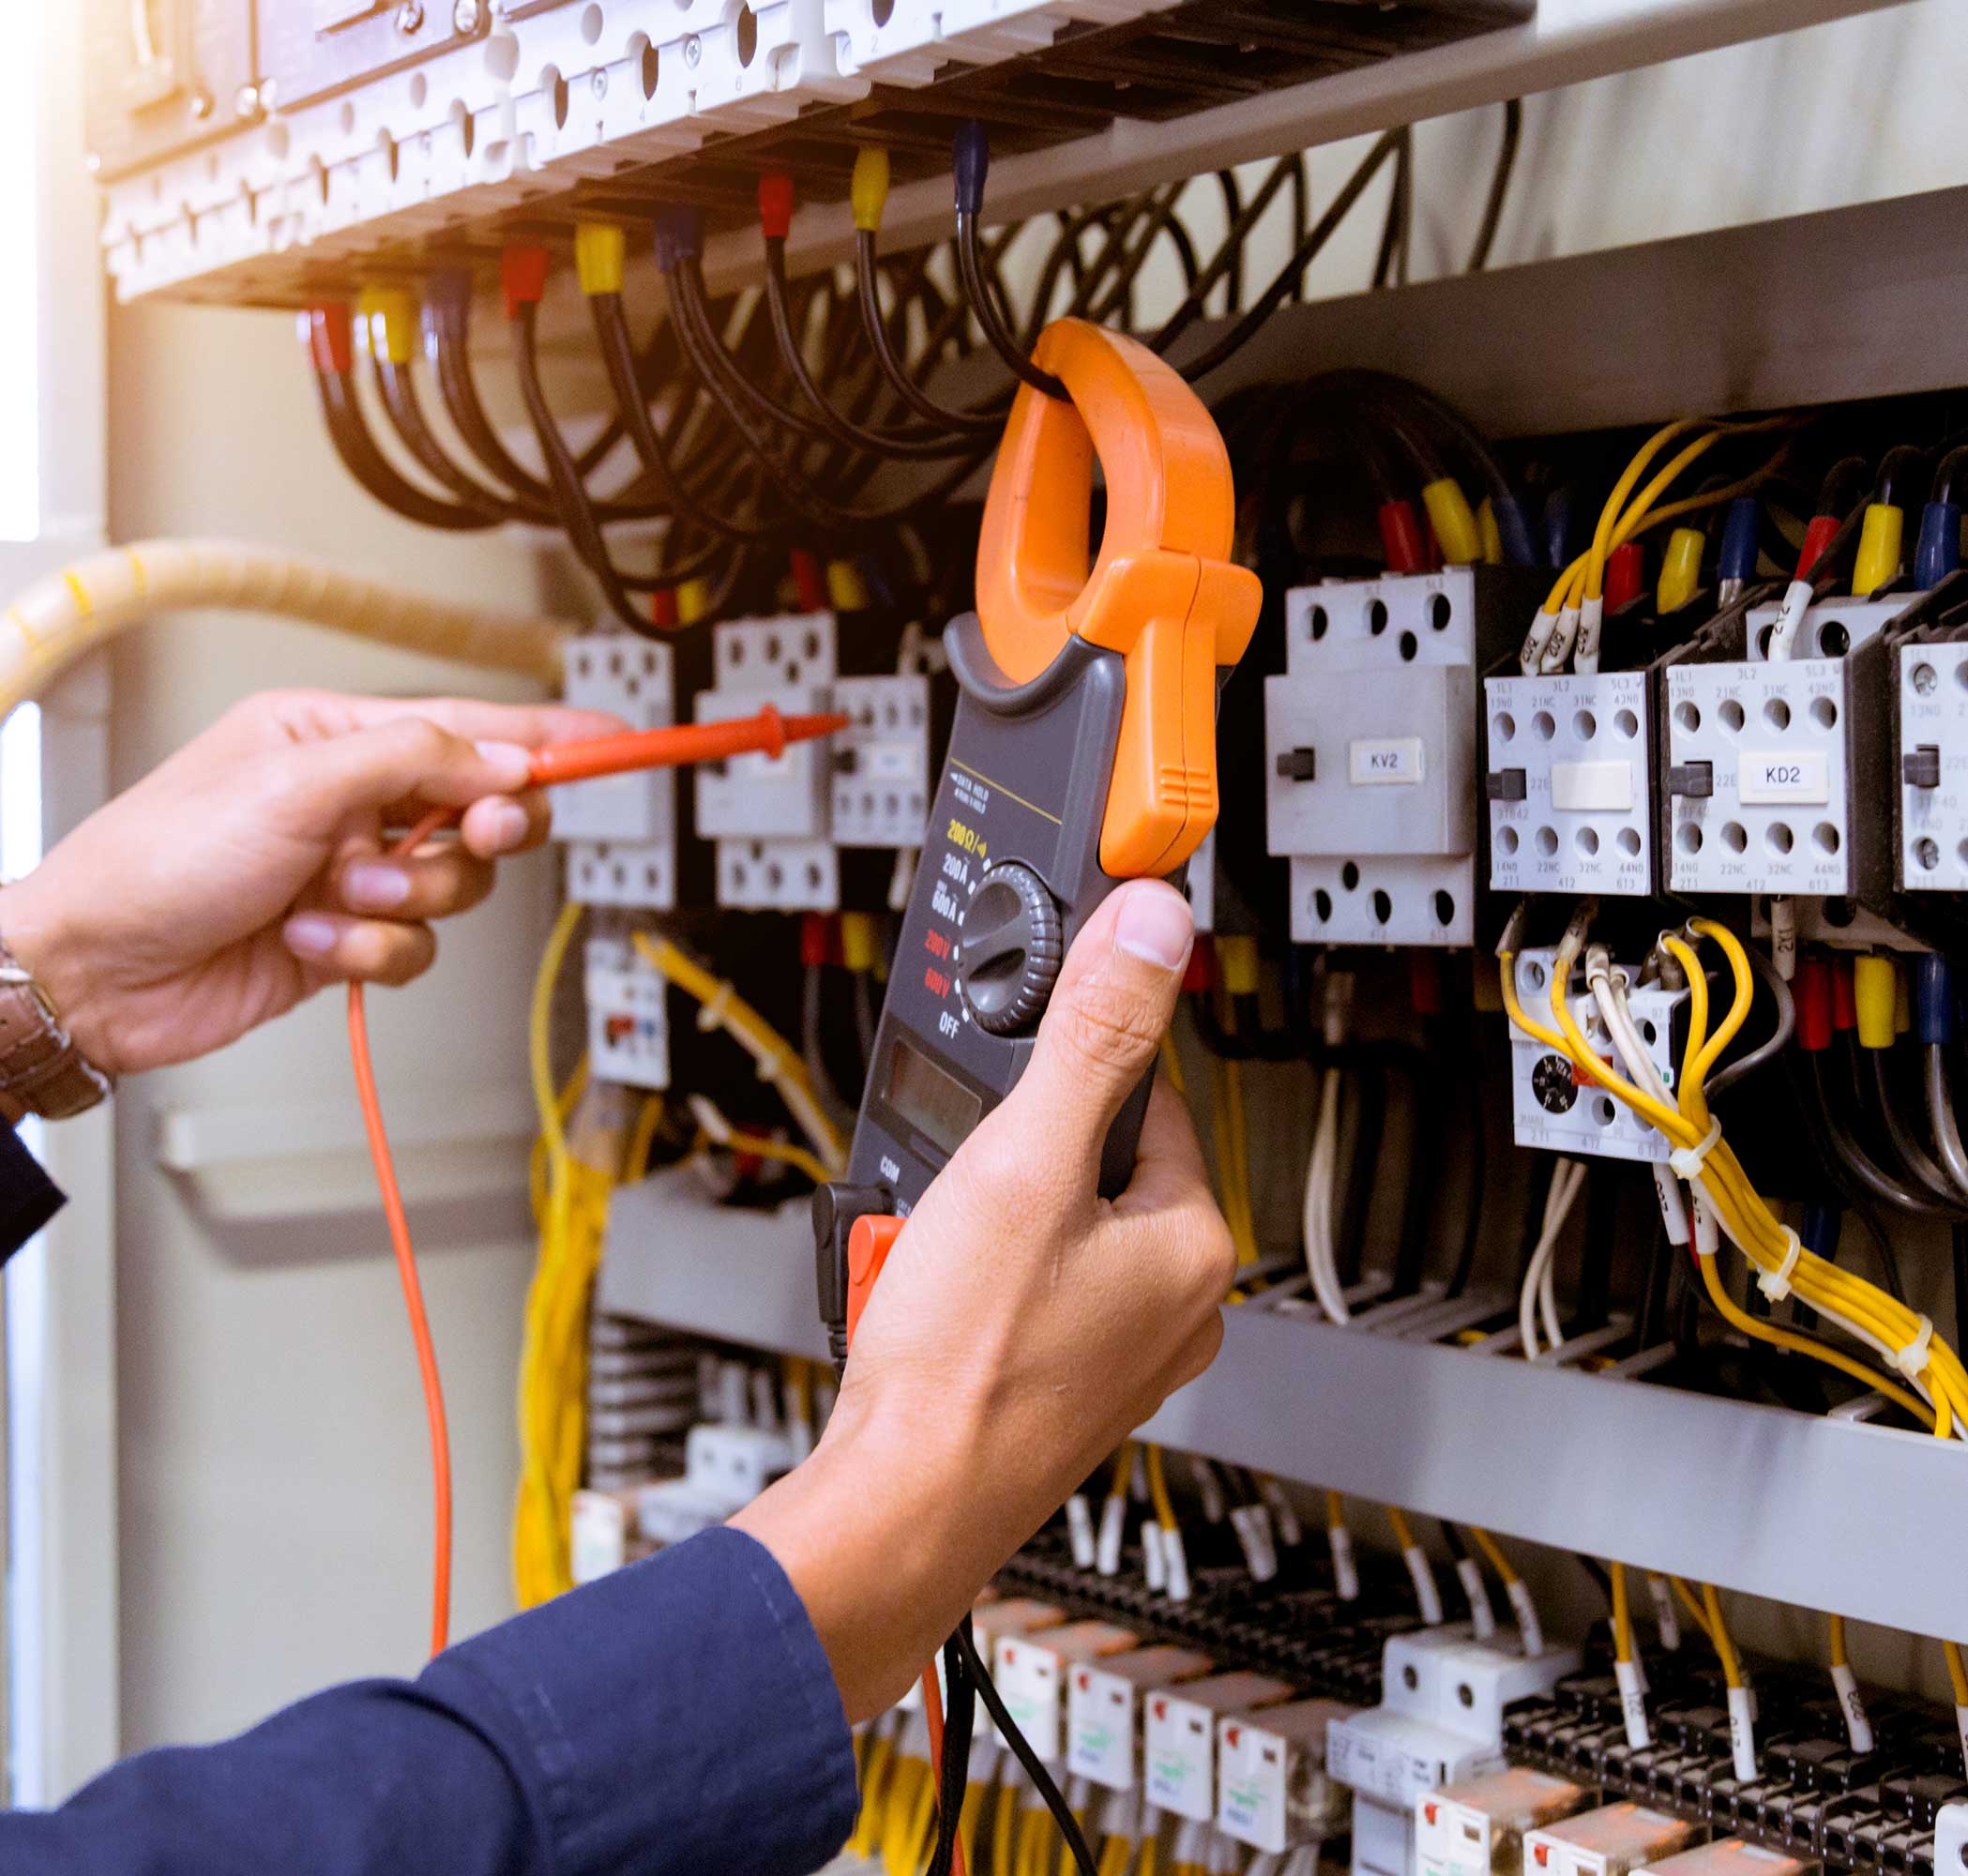 Electrical inspections and testing in Birkenhead